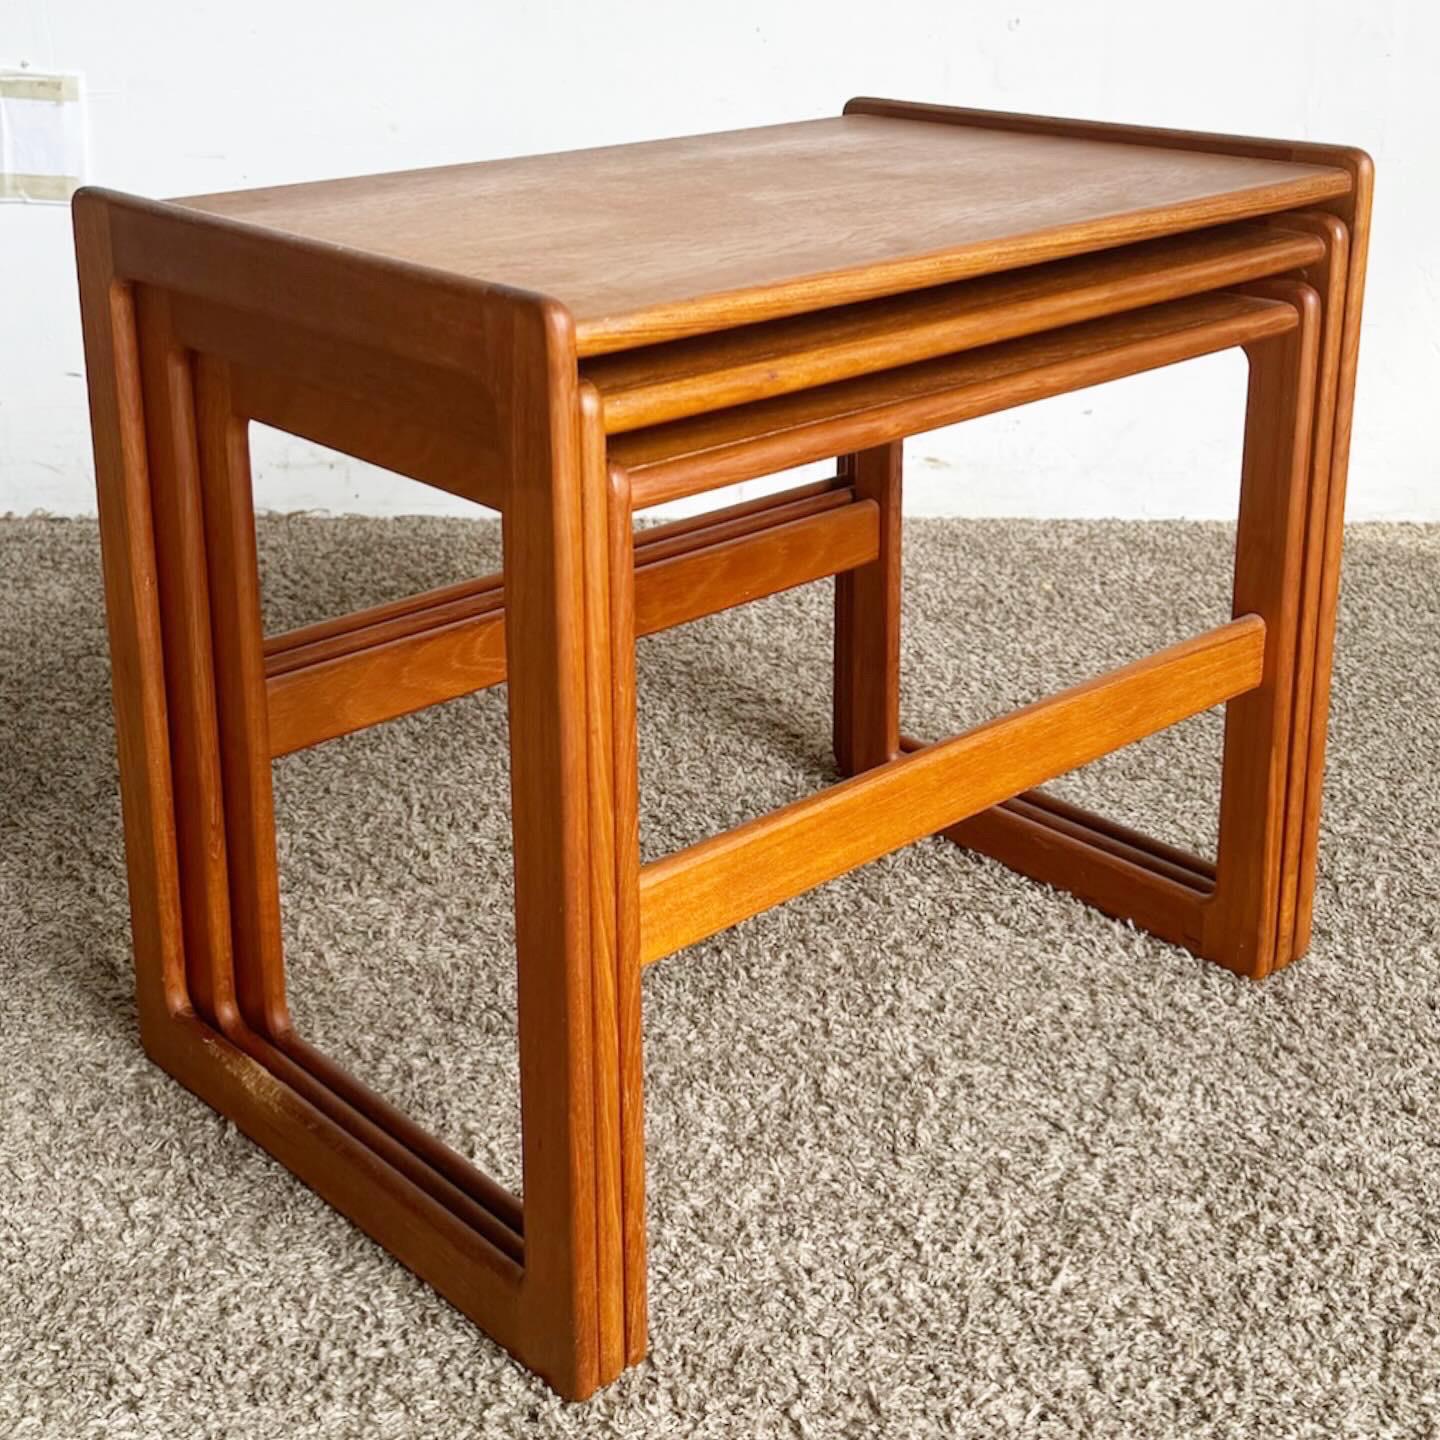 The Mid Century Modern Teak Nesting Tables, a set of three, offer stylish versatility in classic mid-century design. Made from high-quality teak, they feature a natural grain, enhancing any room with organic beauty. The set includes three sizes,